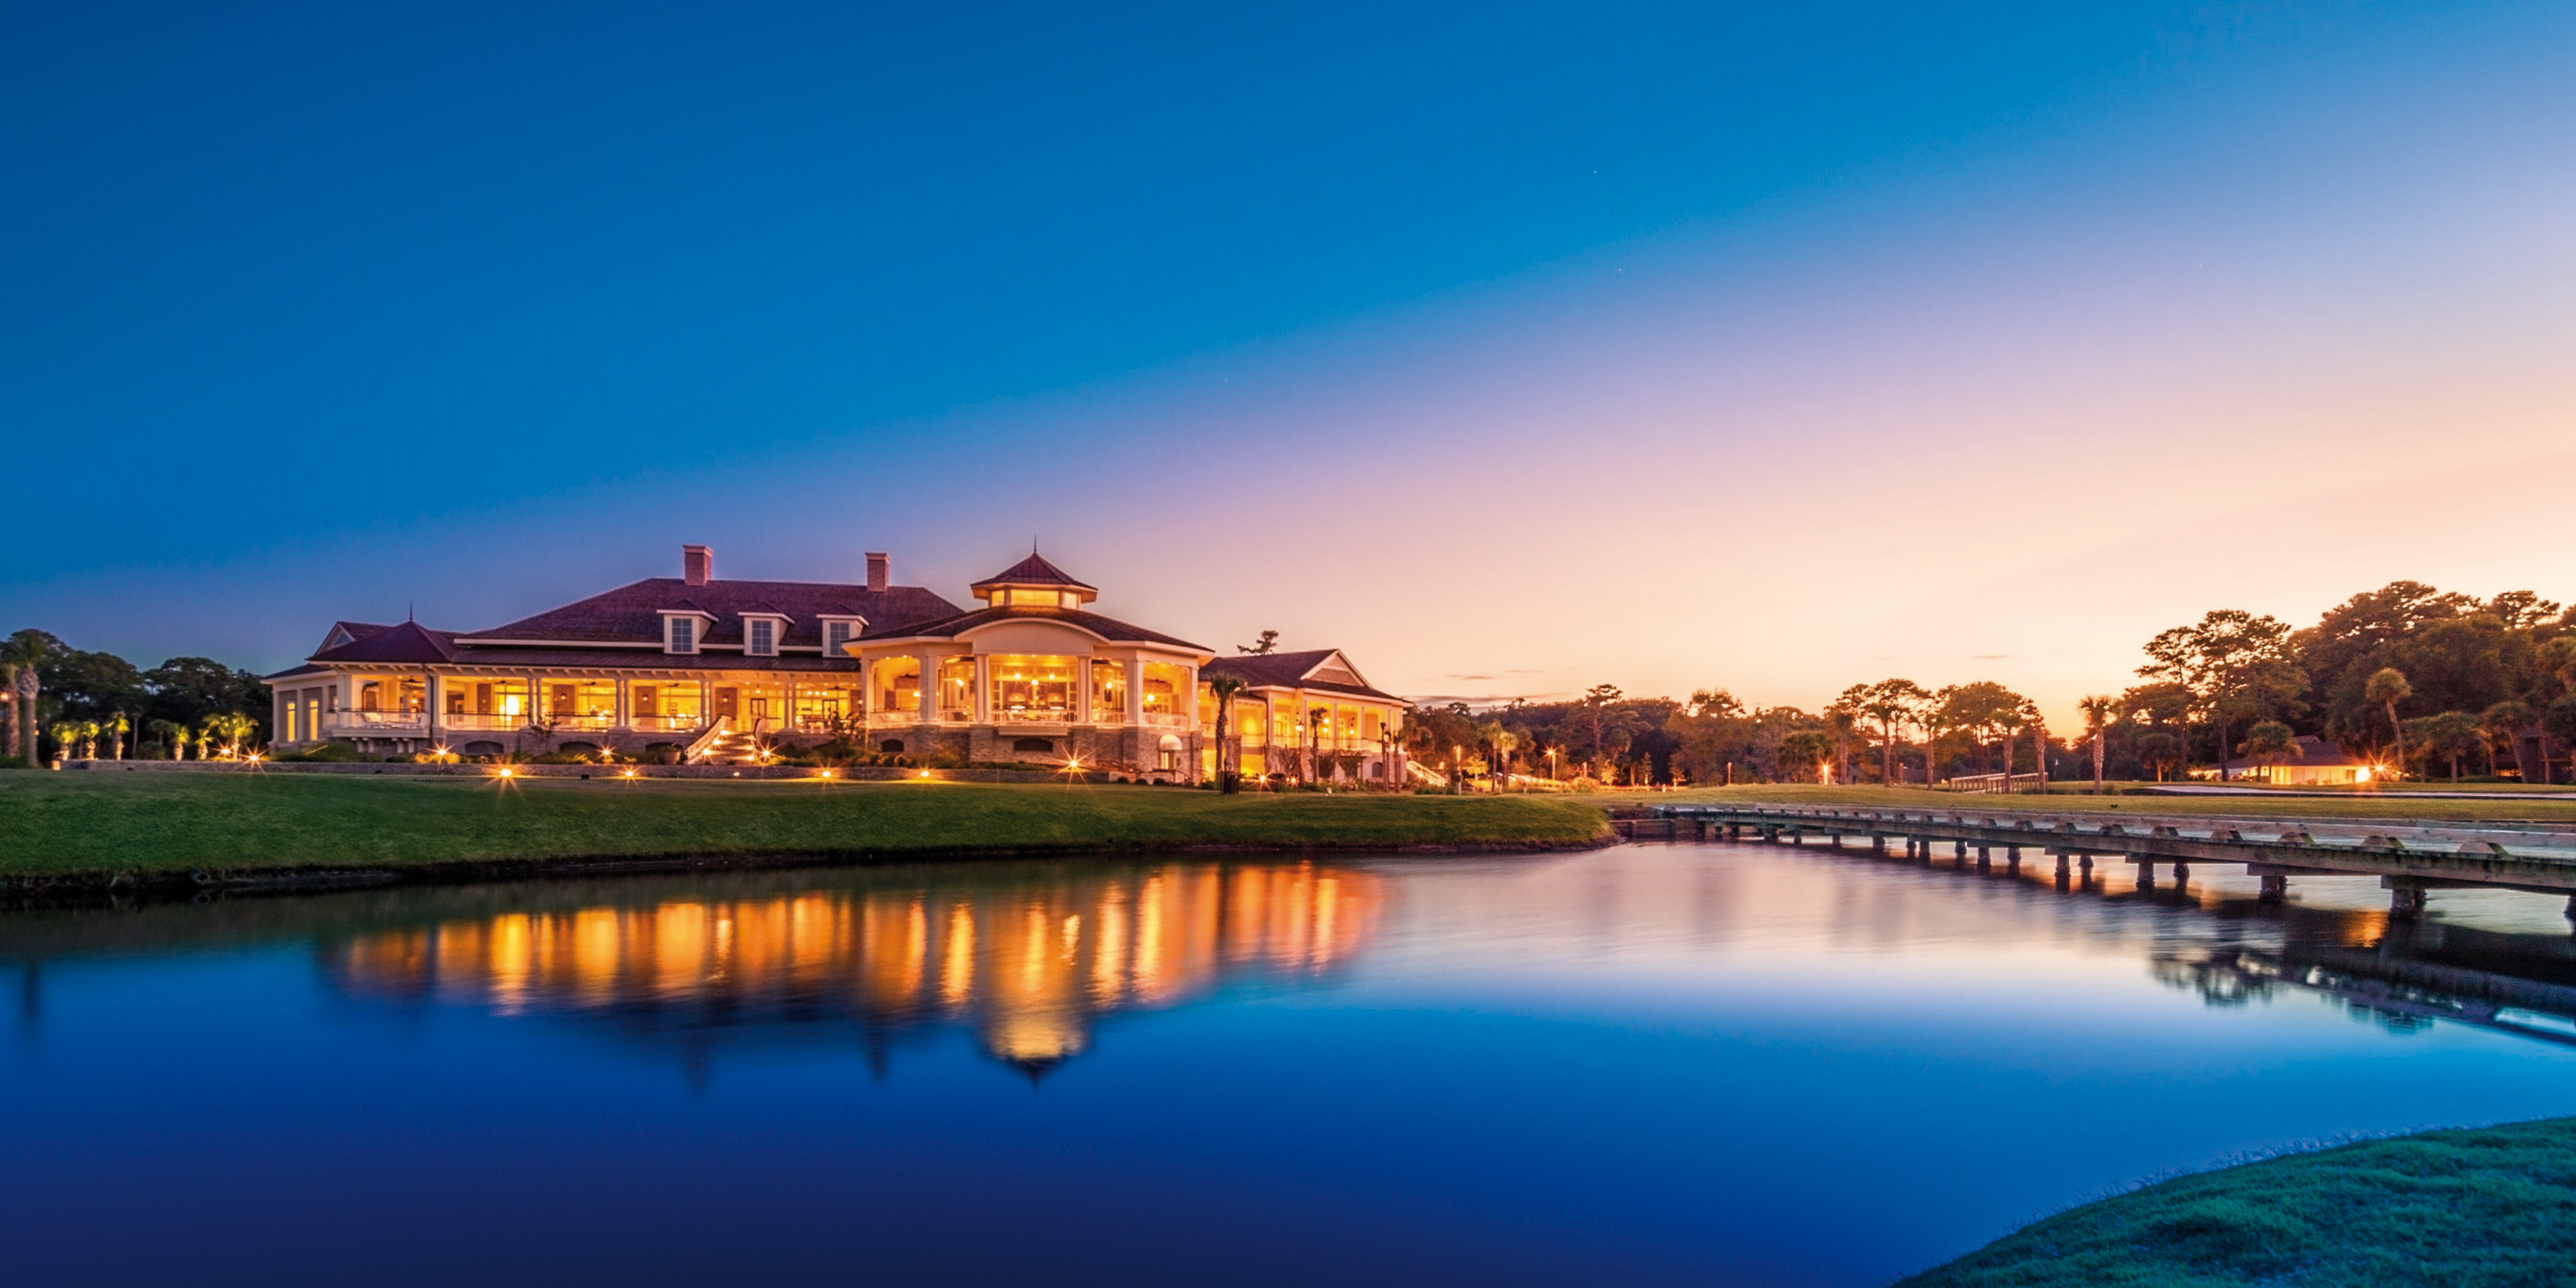 Sea Pines Plantation Golf Clubhouse Cooper Carry